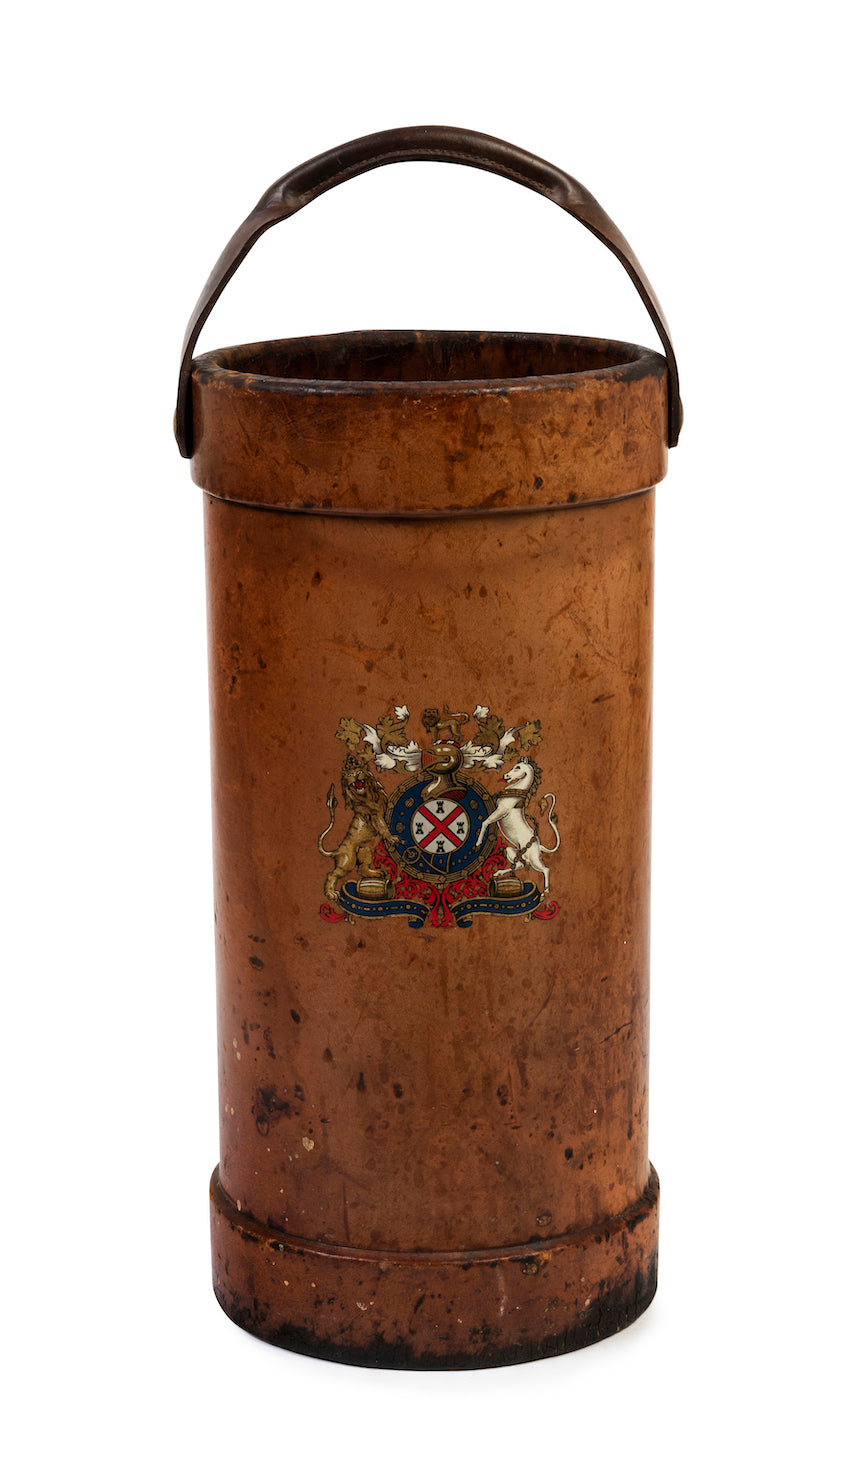 SOLD An Armorial decorated tan leather umbrella stand with handle, English Circa 1920